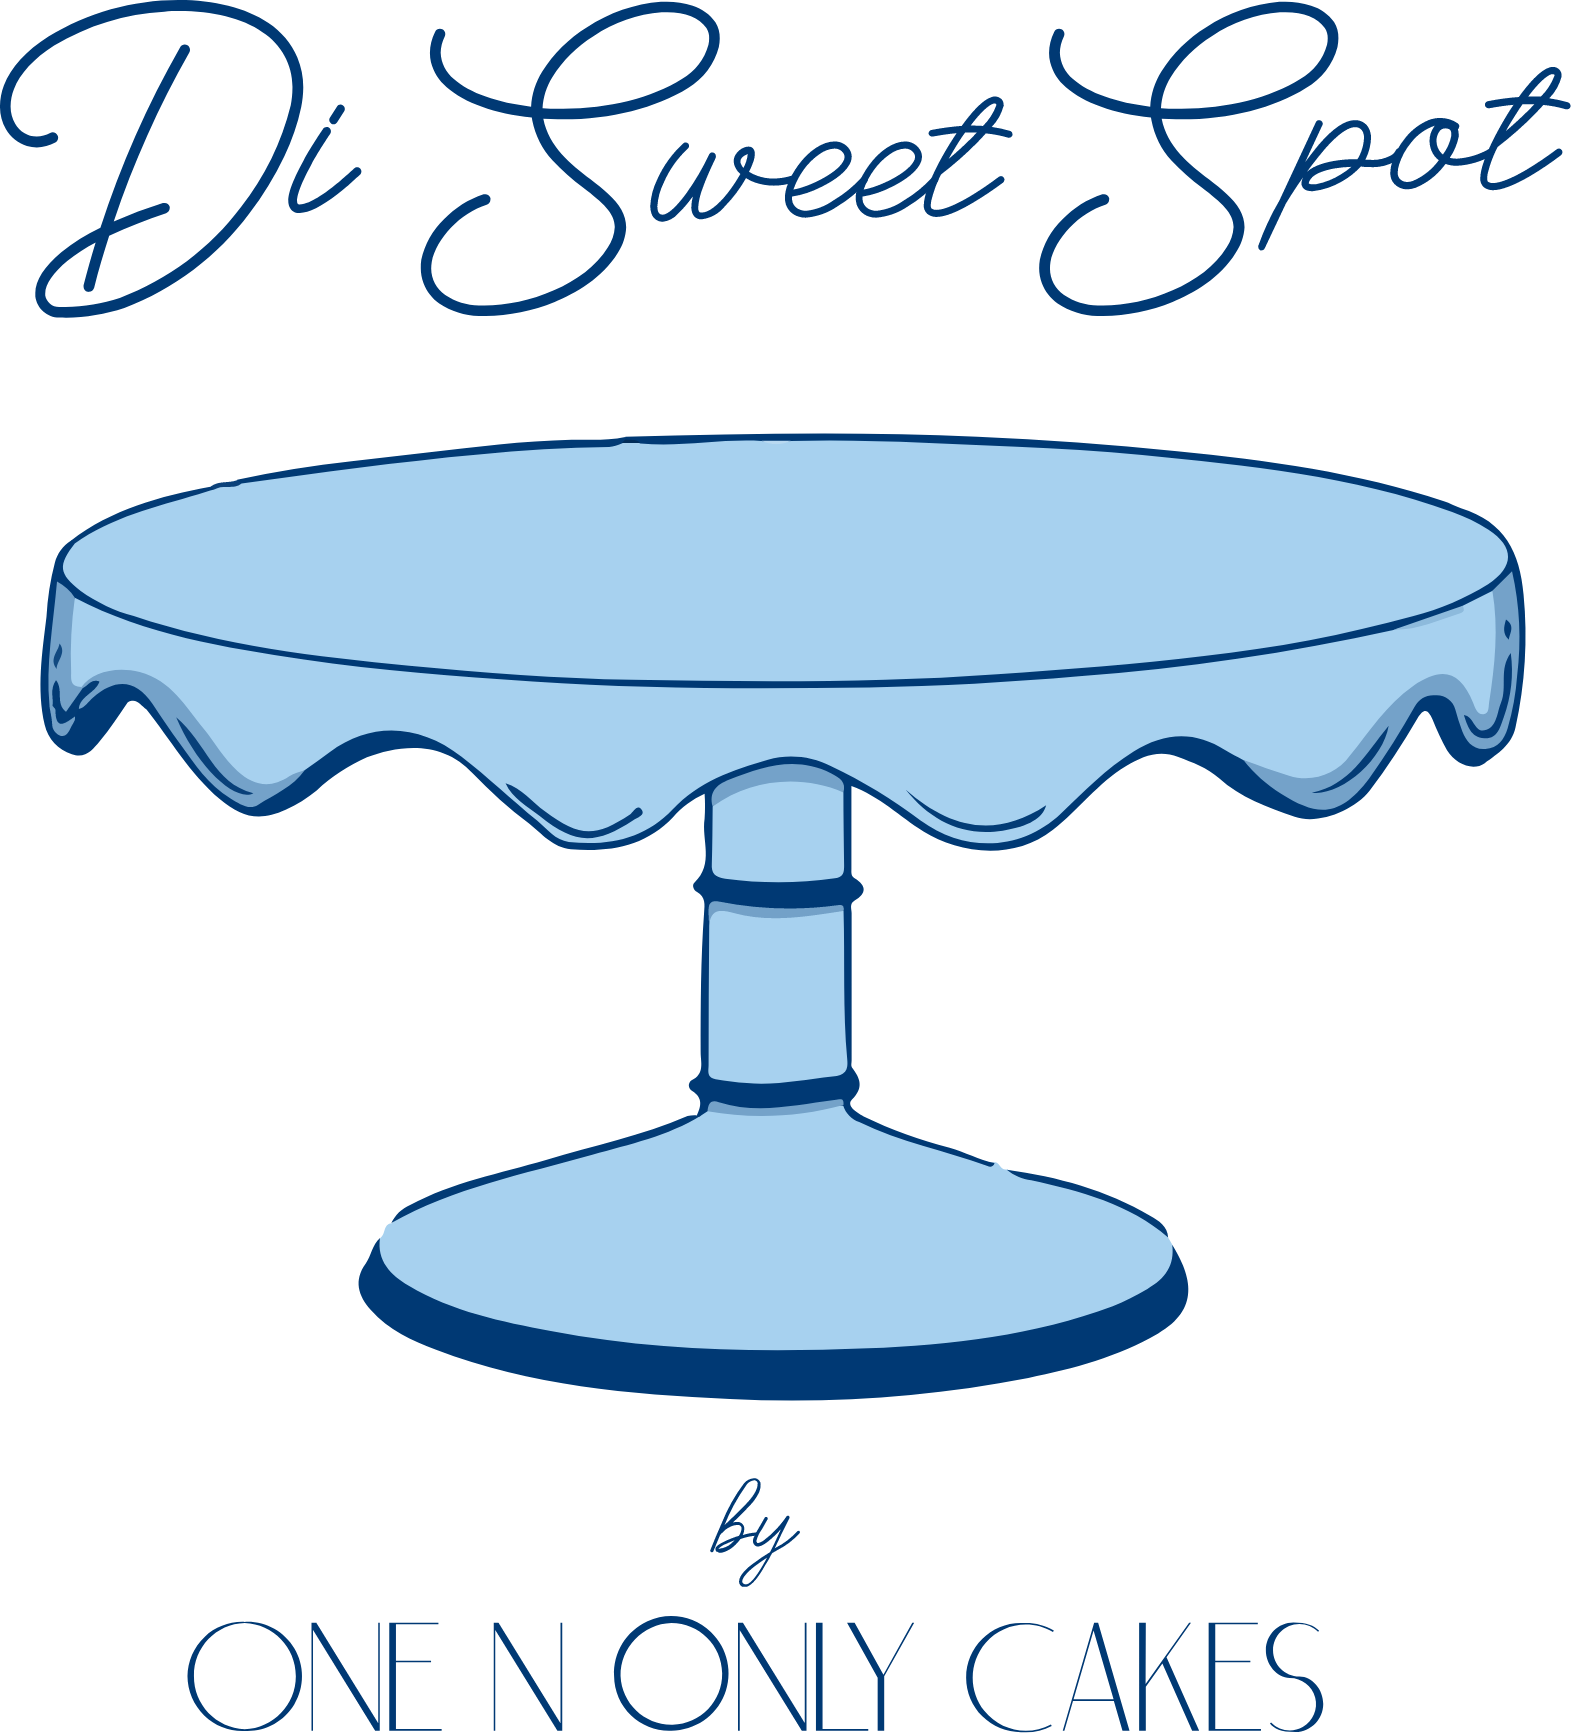 Di Sweet Spot by One N Only Cakes